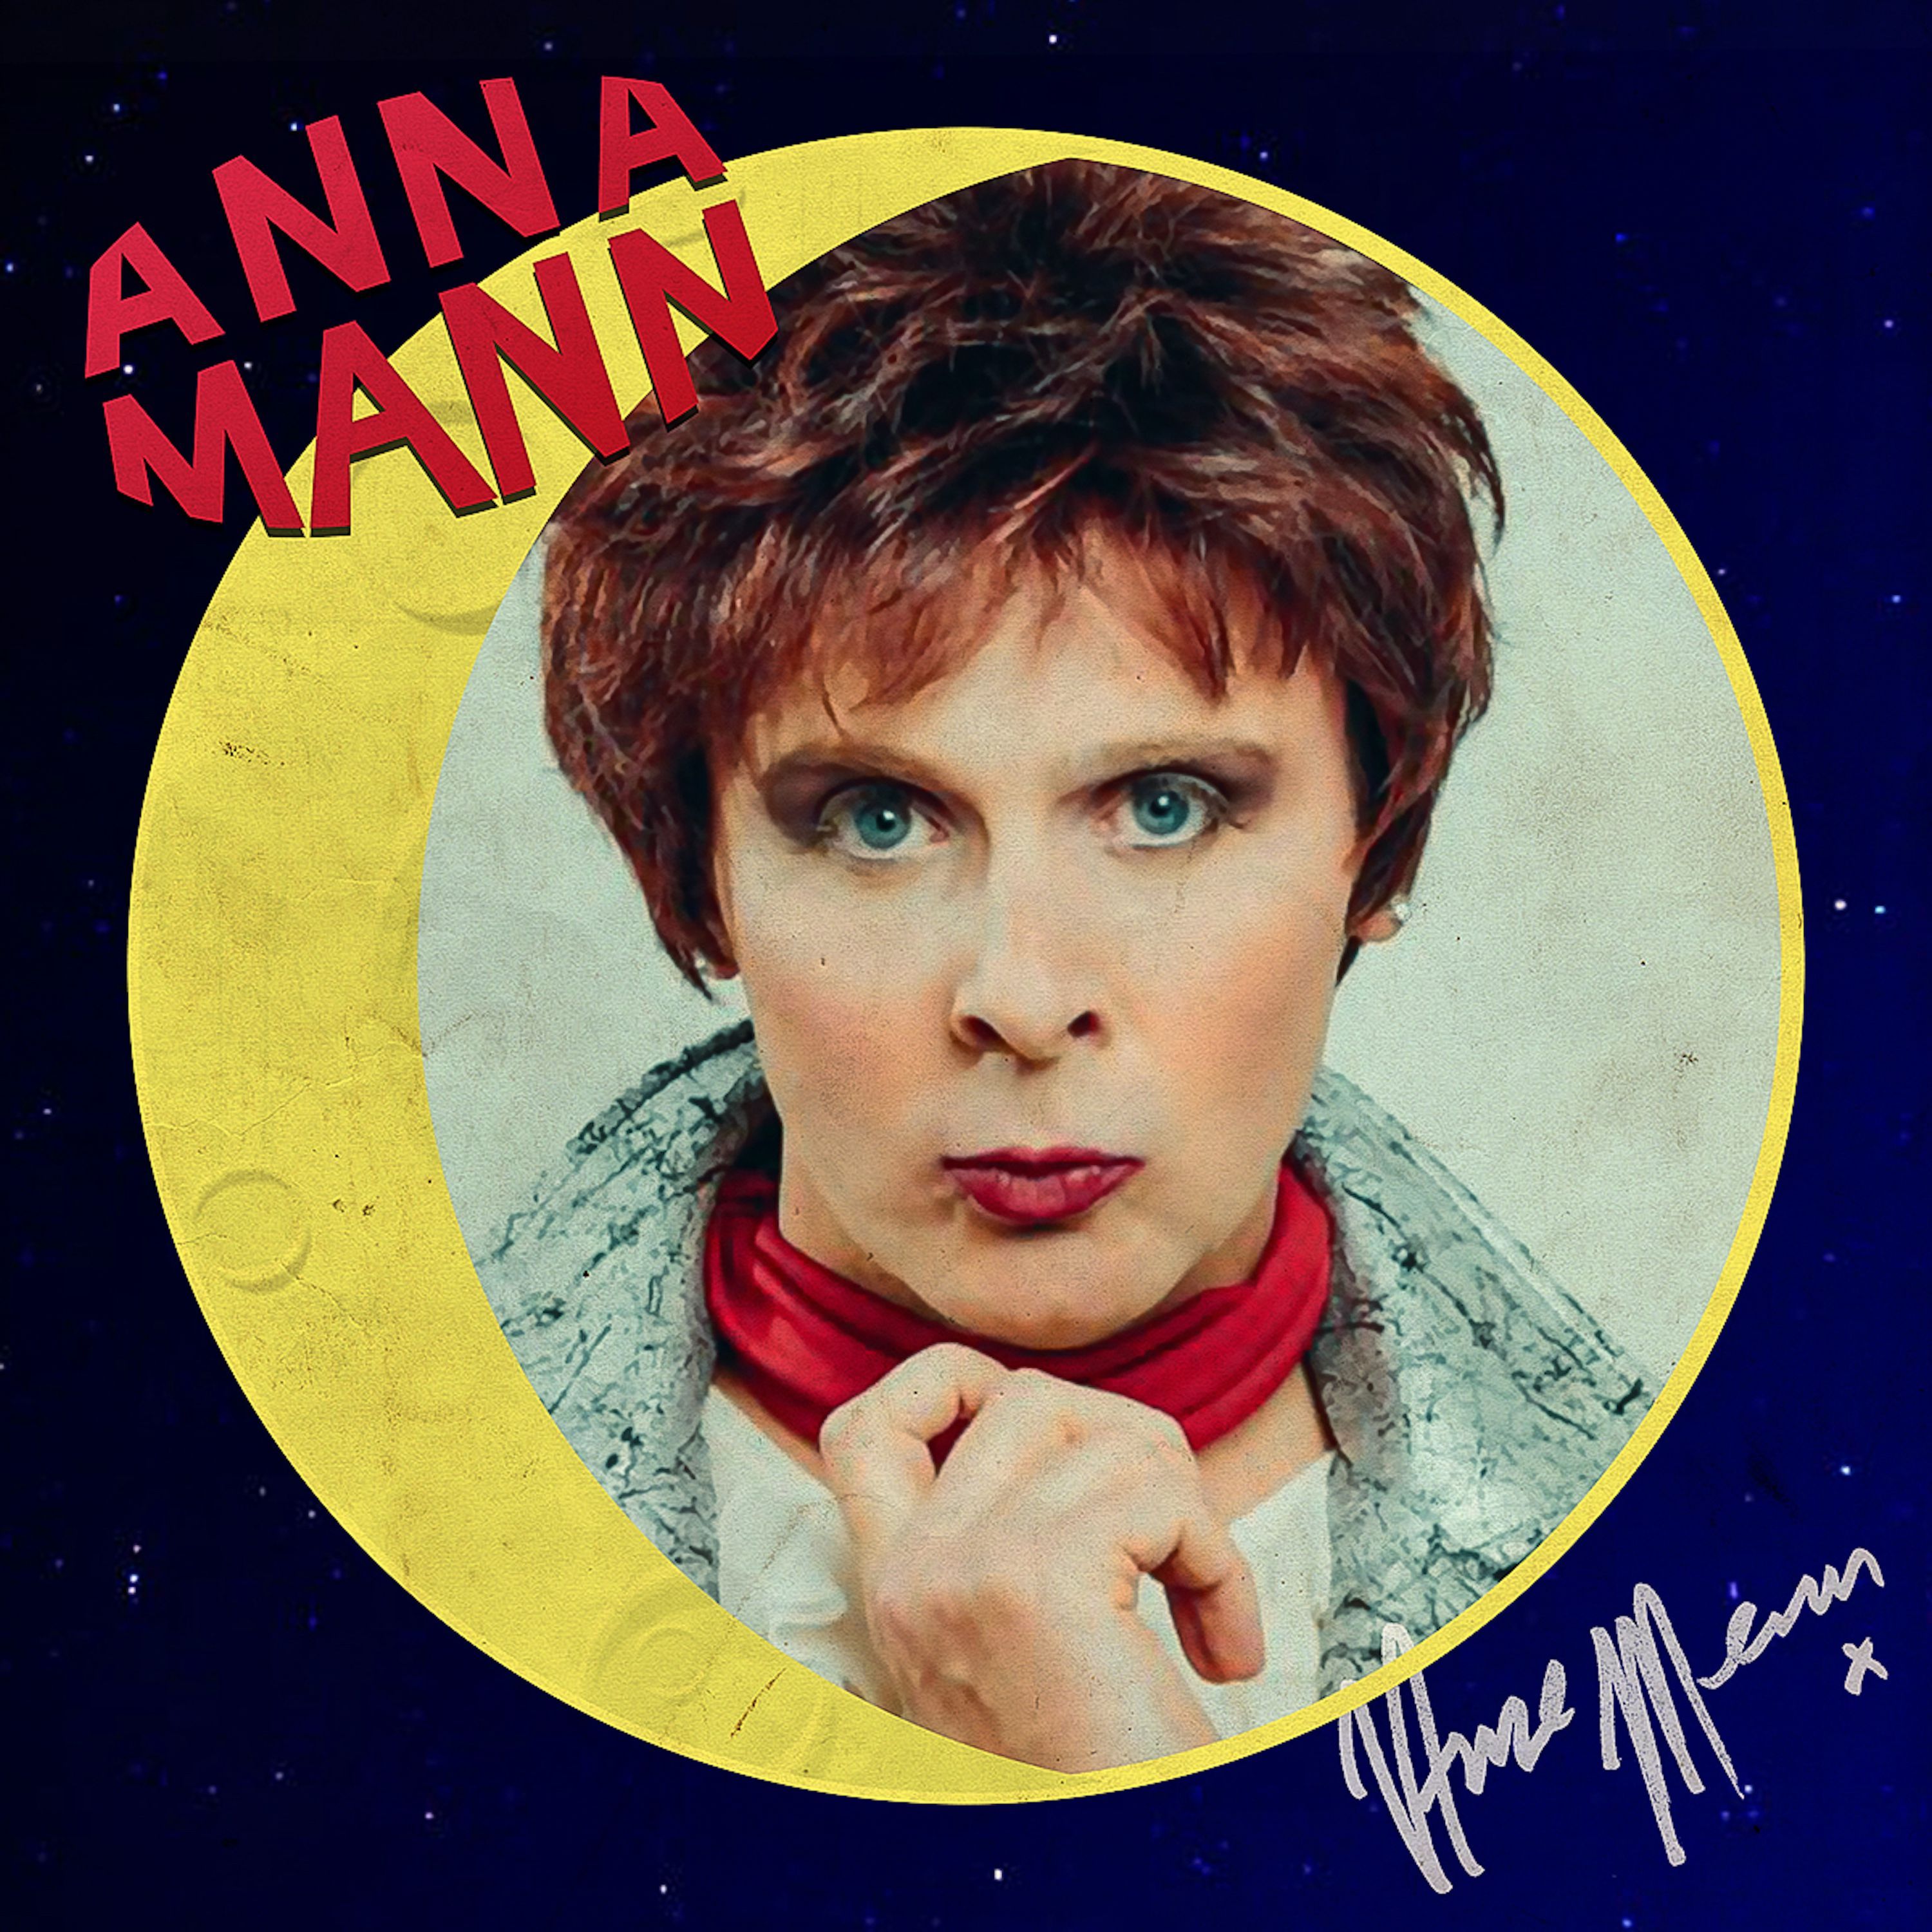 Anna Mann’s Bedtime Anecdote Episode 16 - Dr Zhivago (she's not in it)